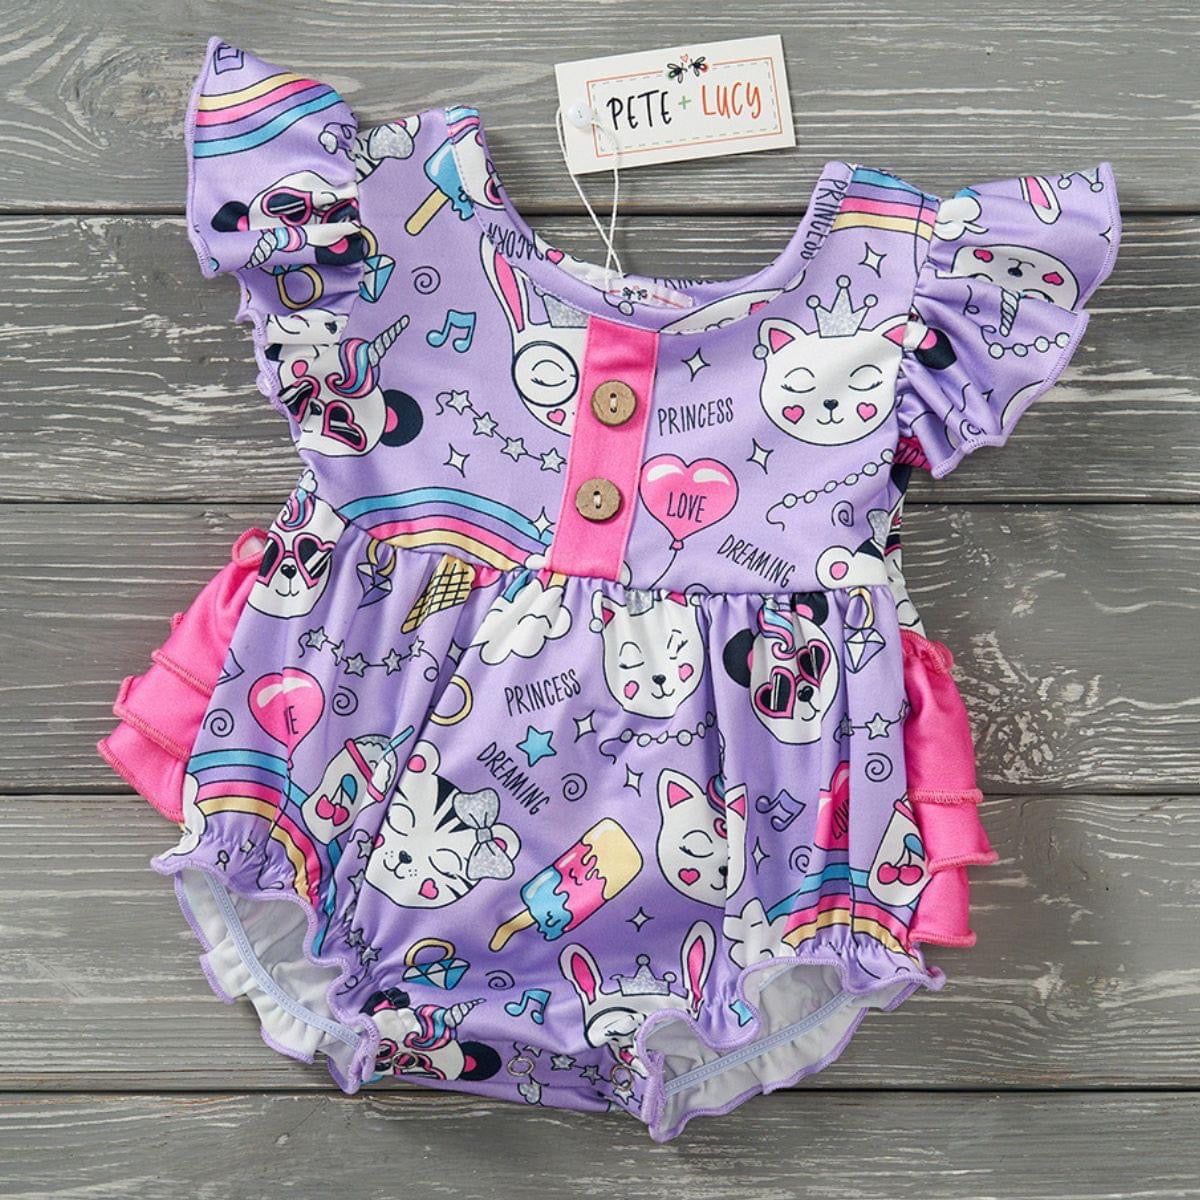 Dreamland Delights Baby Romper by Pete and Lucy